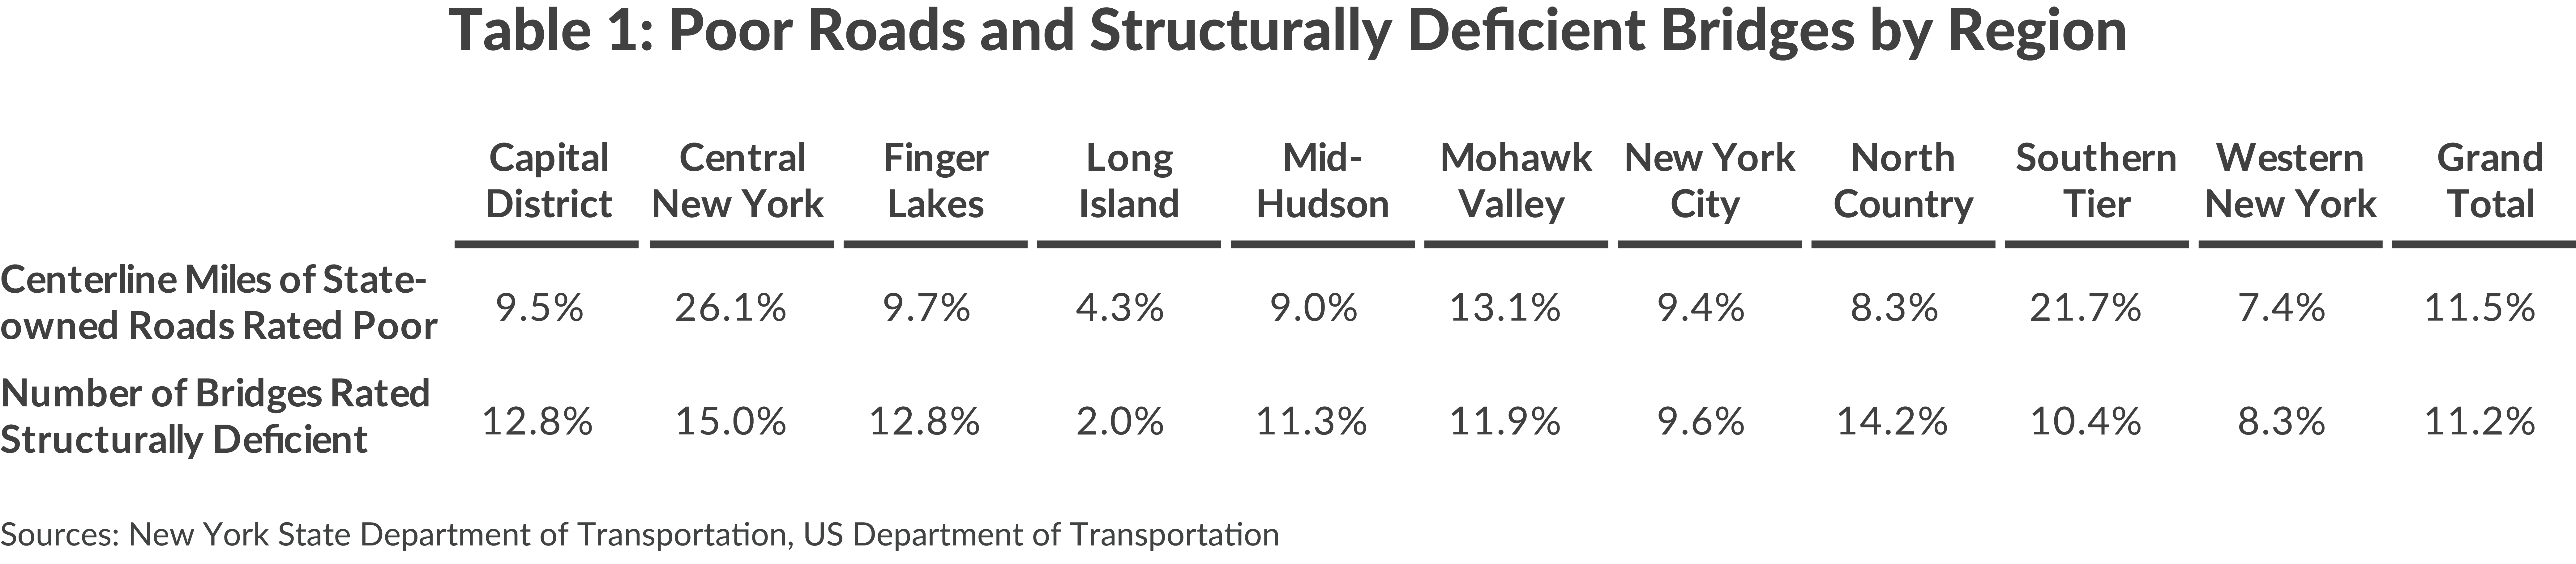 Table 1: Poor Roads and Structurally Deficient Bridges by Region